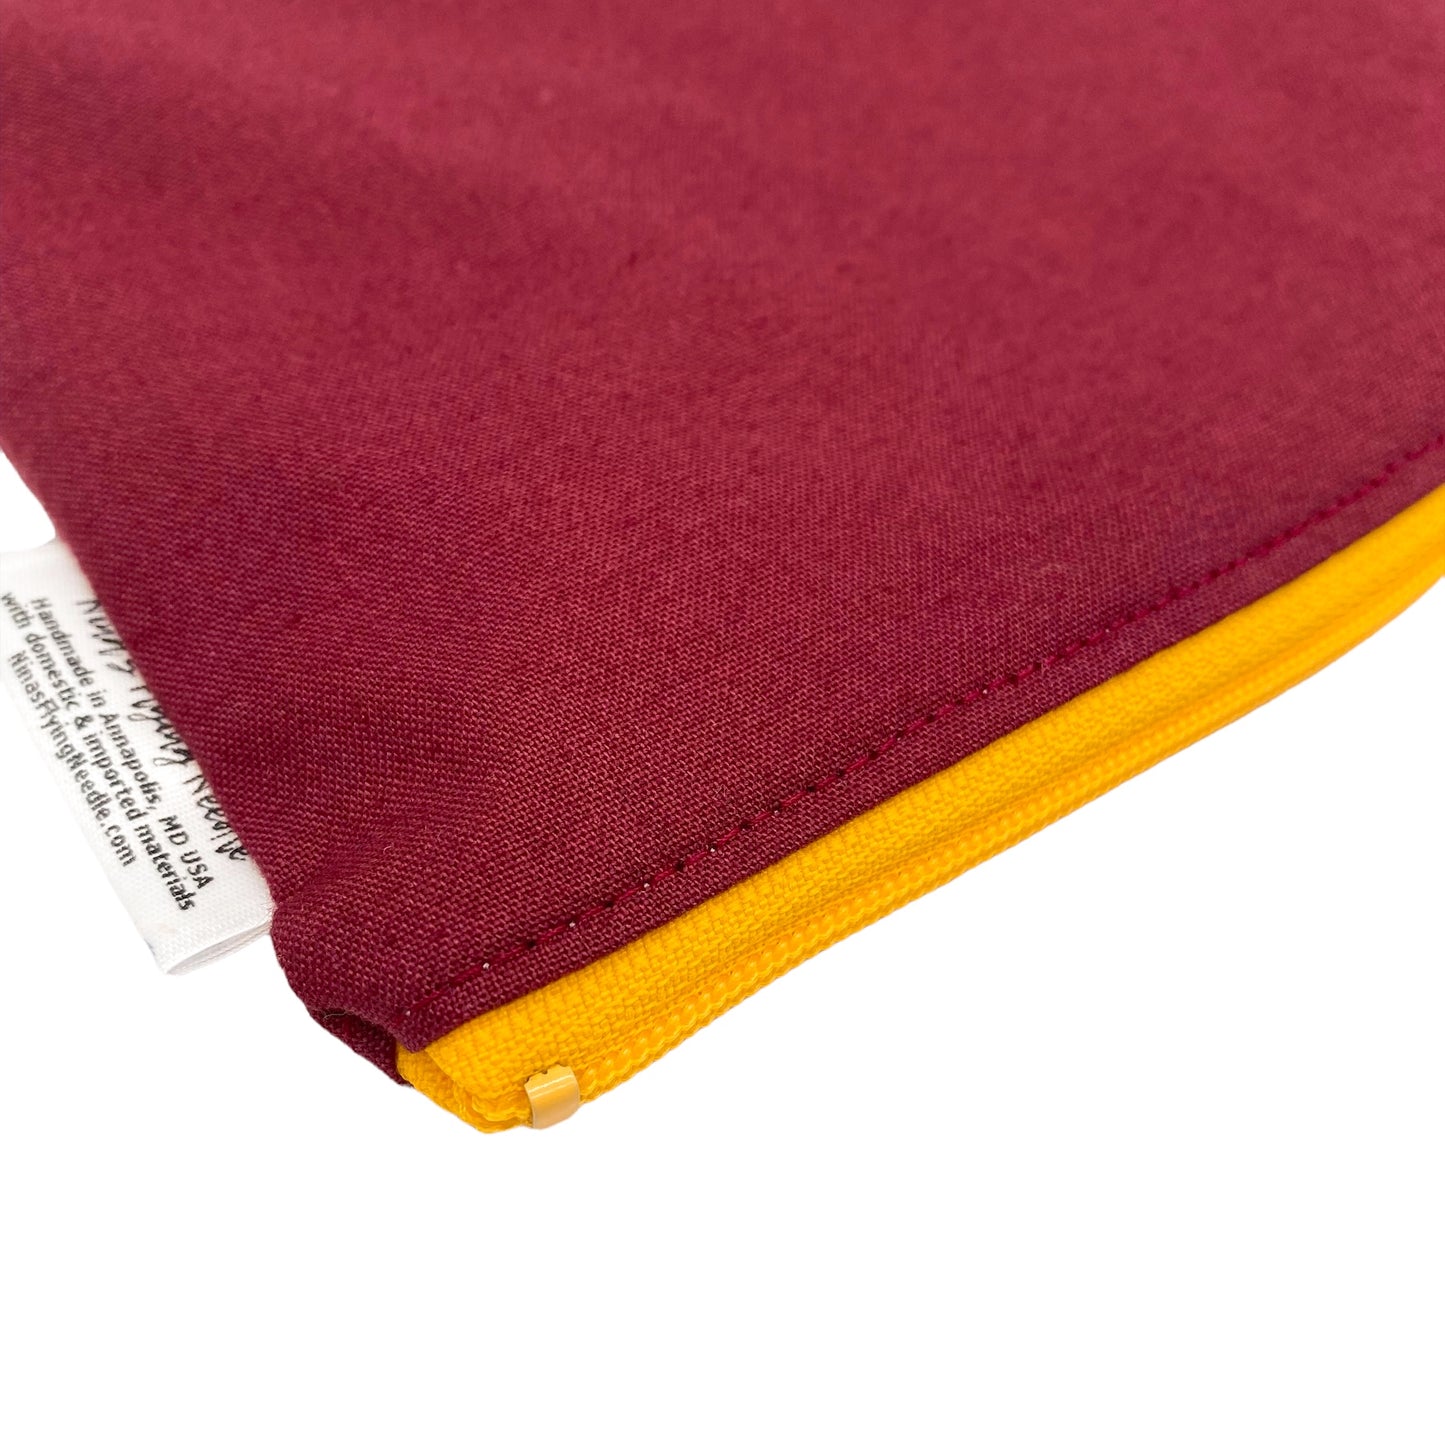 Sandwich Sized Reusable Zippered Bag Solid Maroon